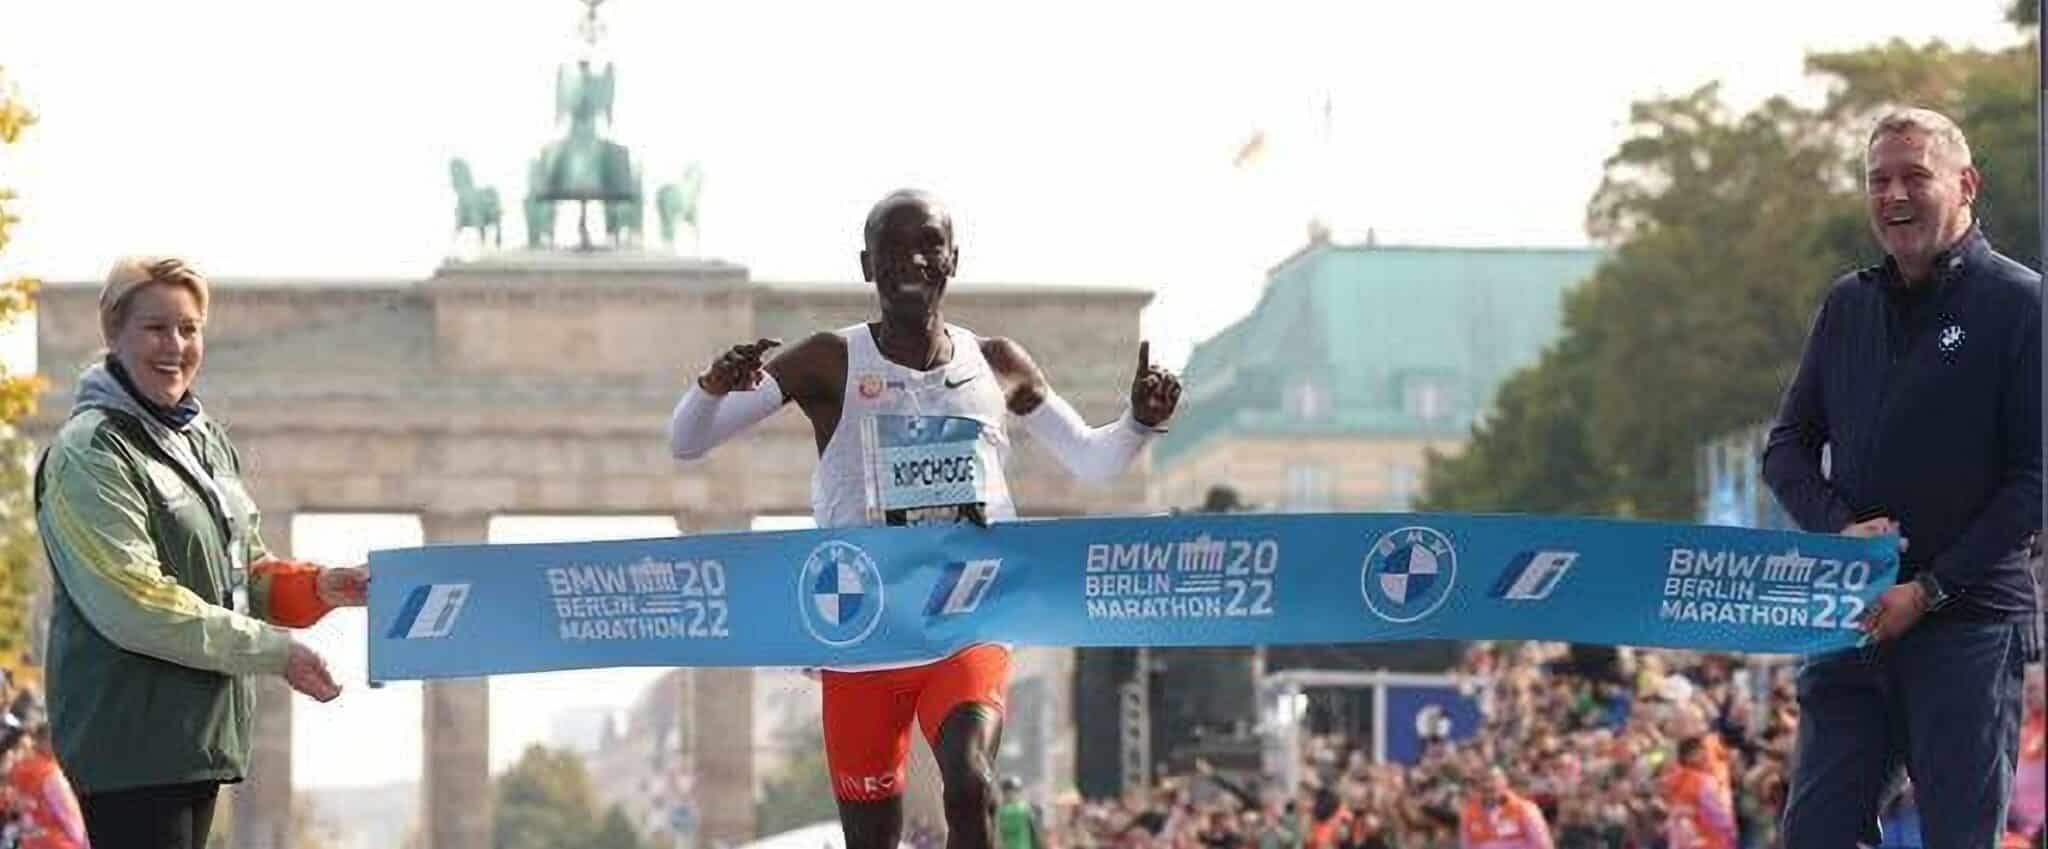 Eliud kipchoge sliced half a minute from his own world record